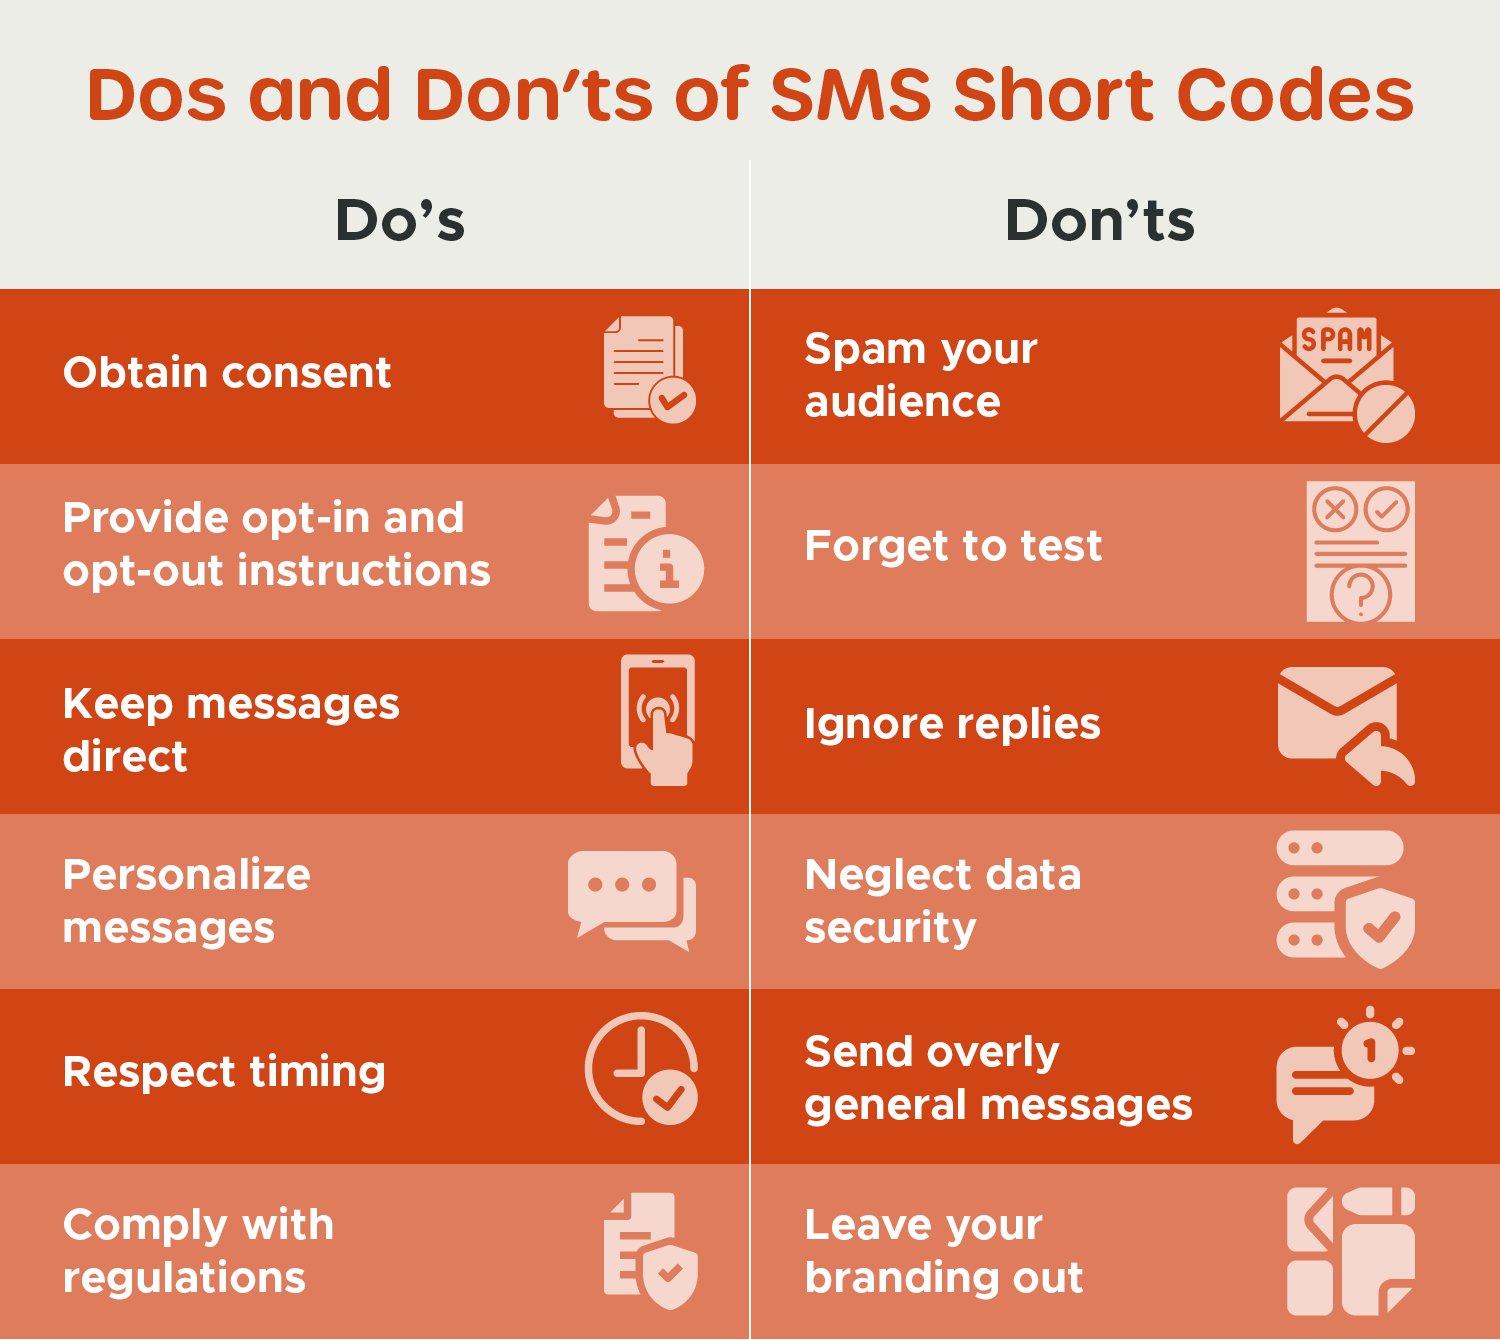 A graphic displaying the dos and don’ts of SMS short codes, which are explained in detail below.